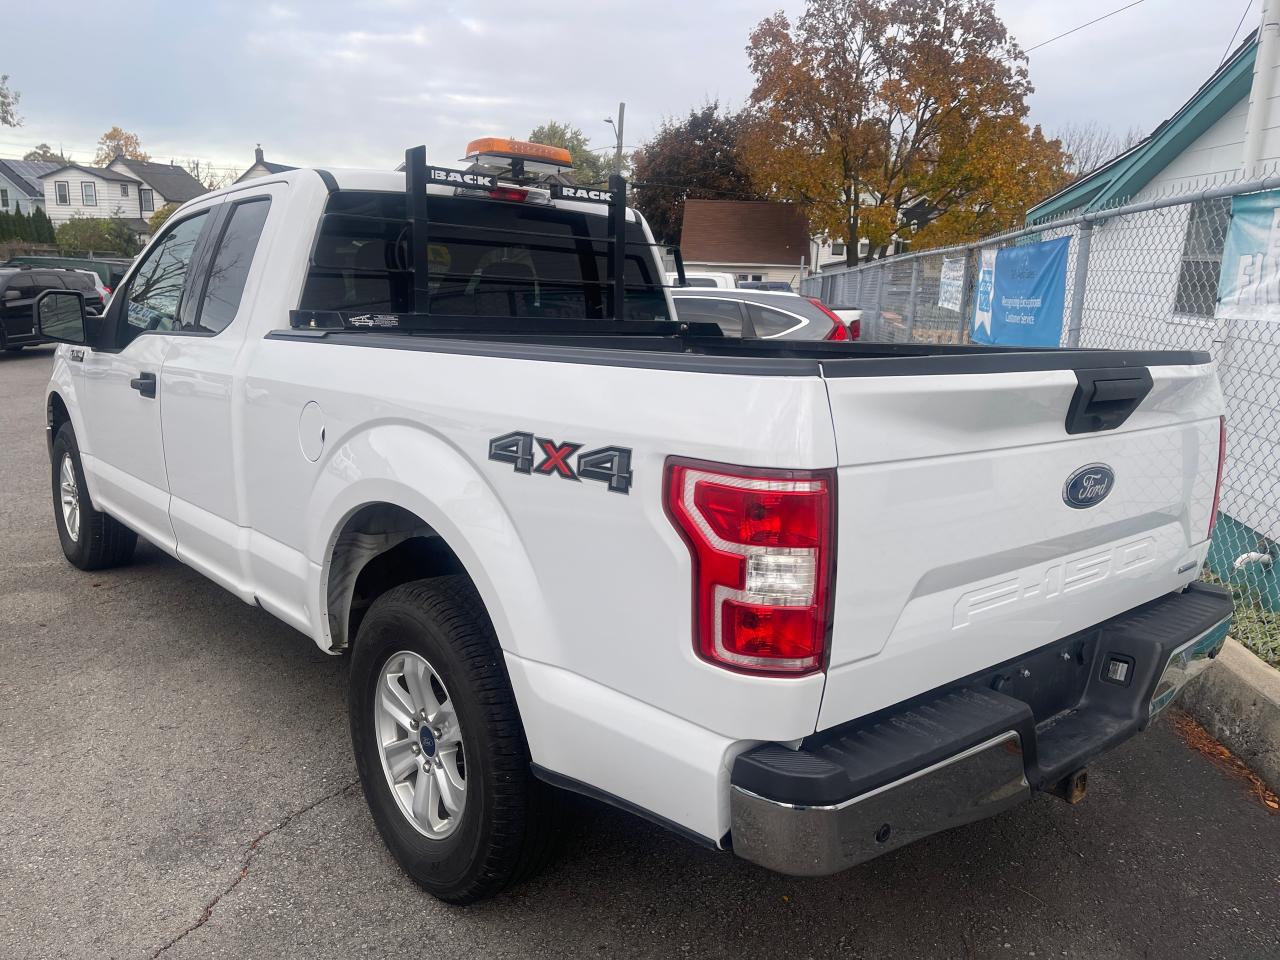 2020 Ford F-150 XLT, Ext. Cab. 4X4, P. Seat, Center console - Photo #5